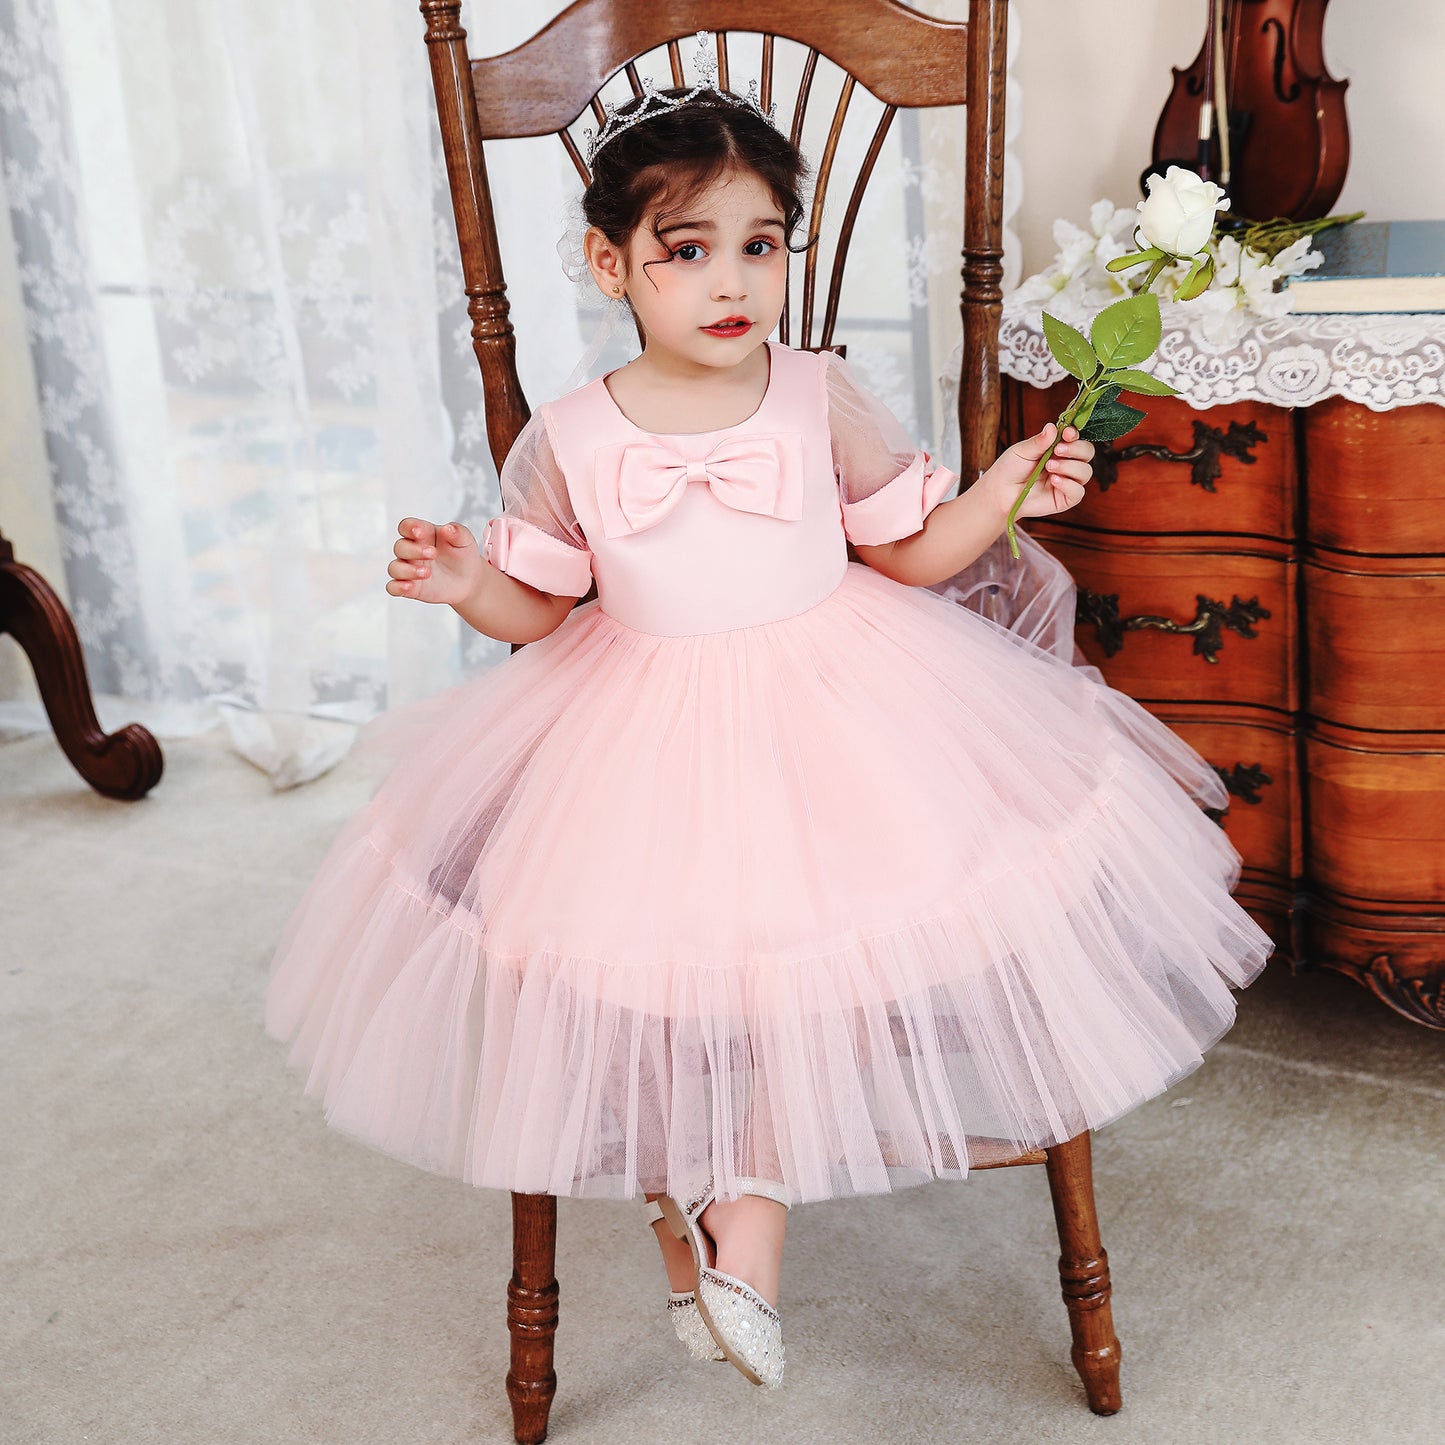 Colorland Younger Kids Party Dress 80-120cm - L2088XZ